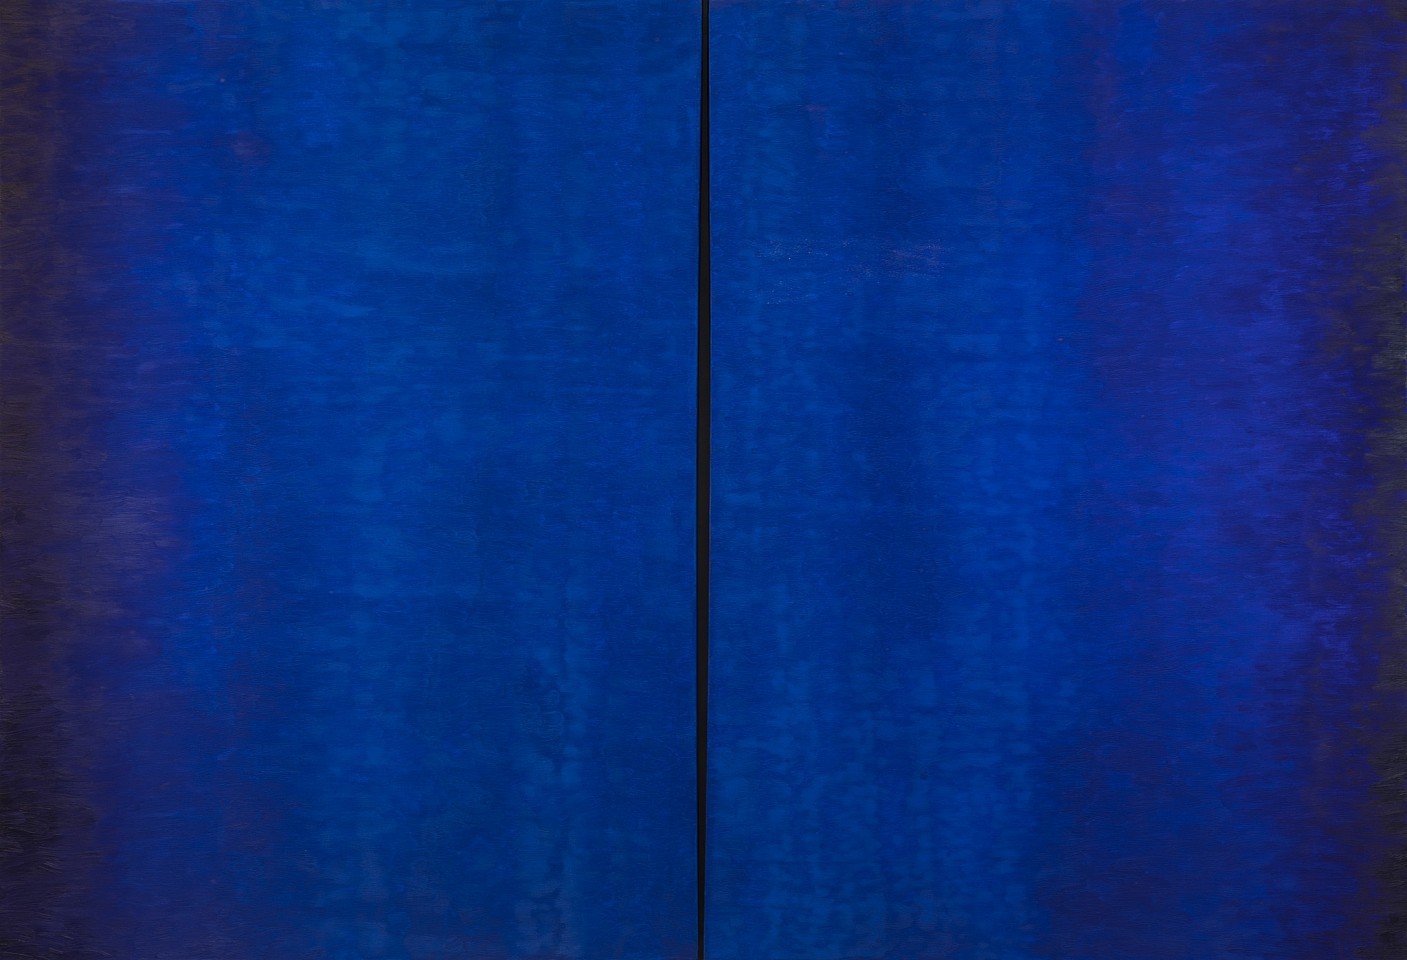 Janet Rogers, Blue Symphony II, 2016
Encaustic on Canvas, 44 x 64 in.
diptych
ROGE00088